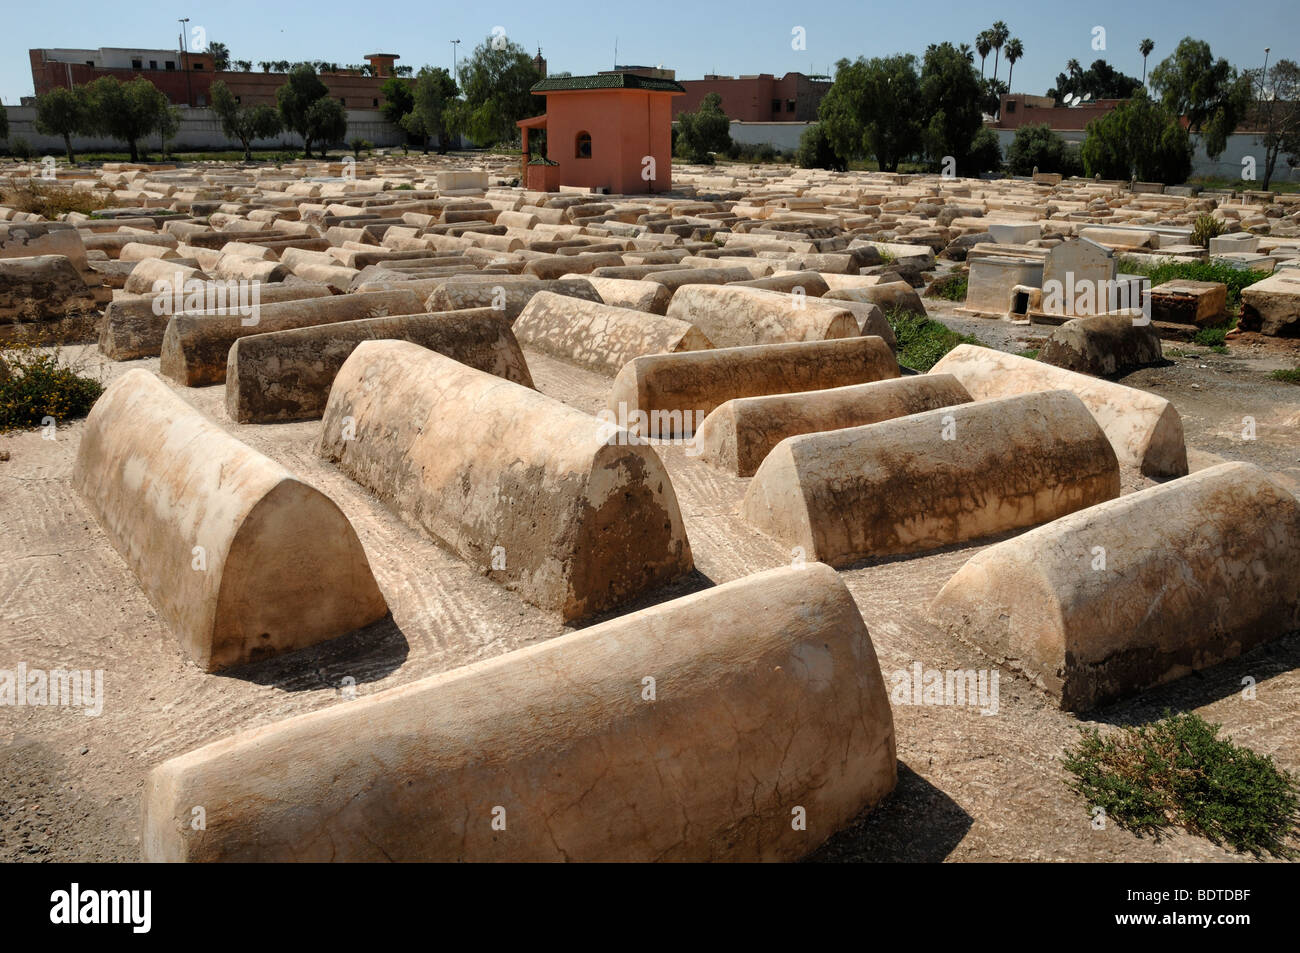 Graves, Tombs or Tombstones in the Jewish Cemetery Mellah Marrakesh Morocco Stock Photo